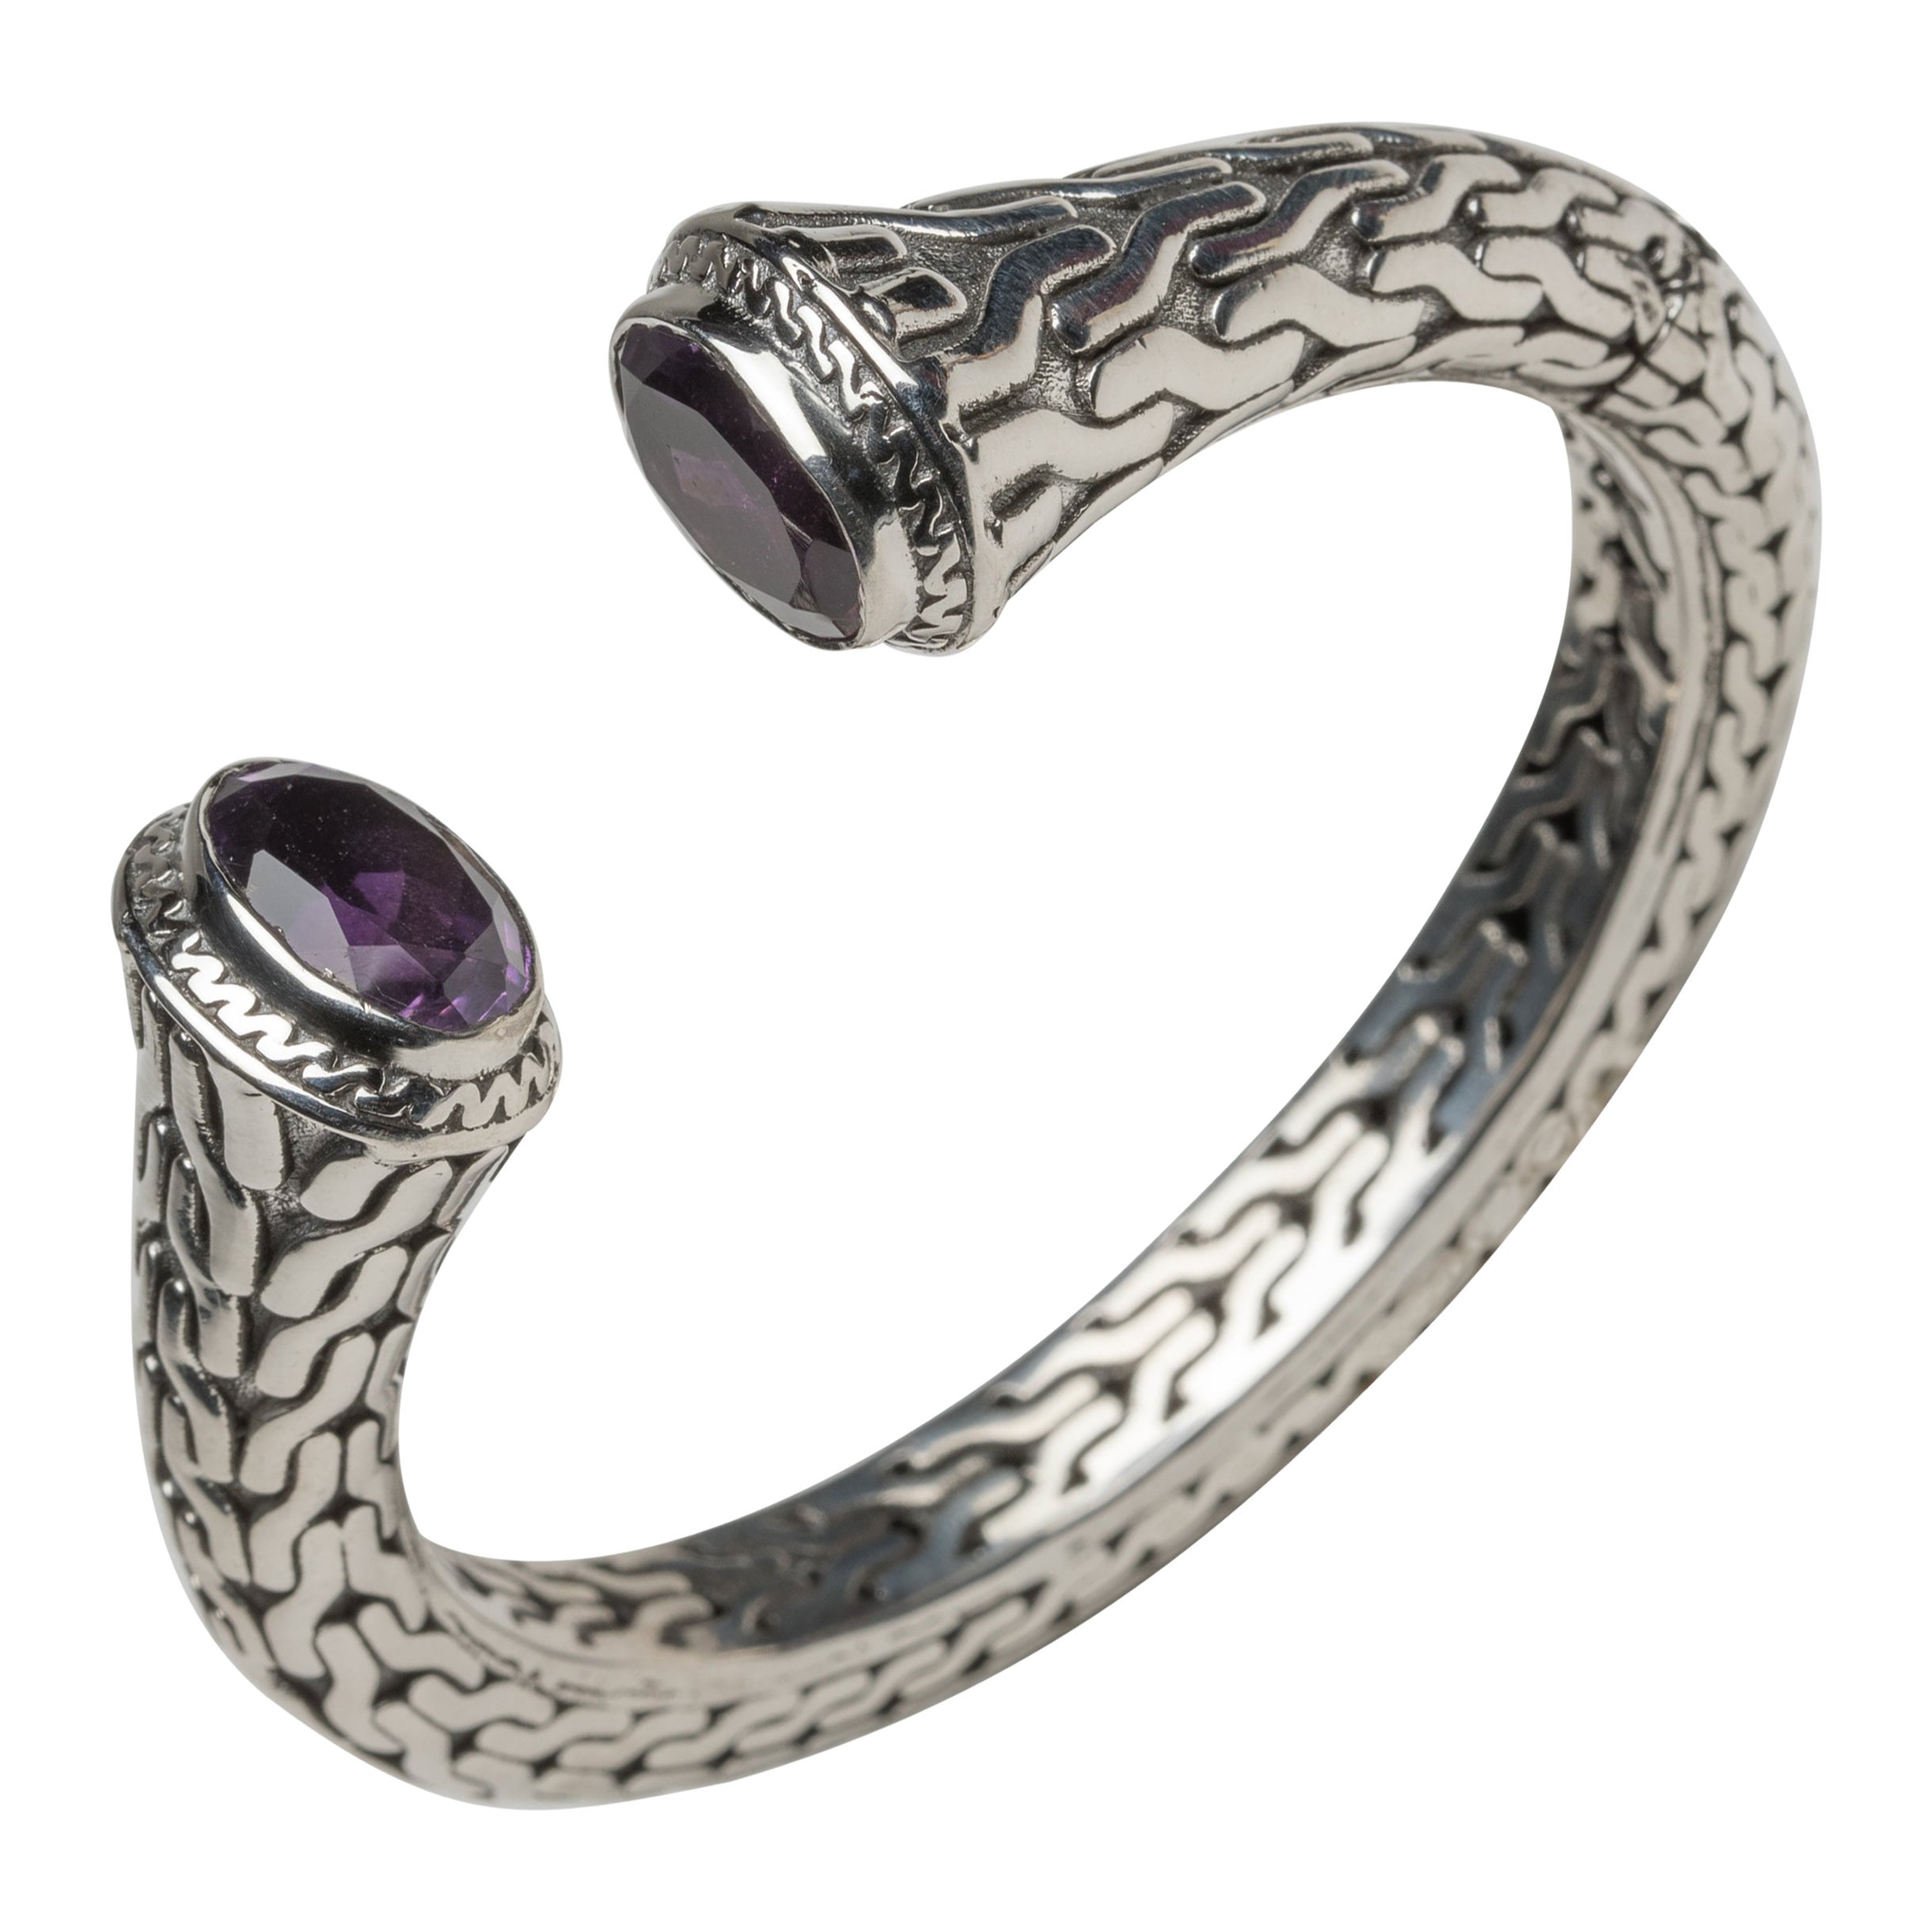 Sterling Silver and Amethyst Clamper Cuff Bracelet